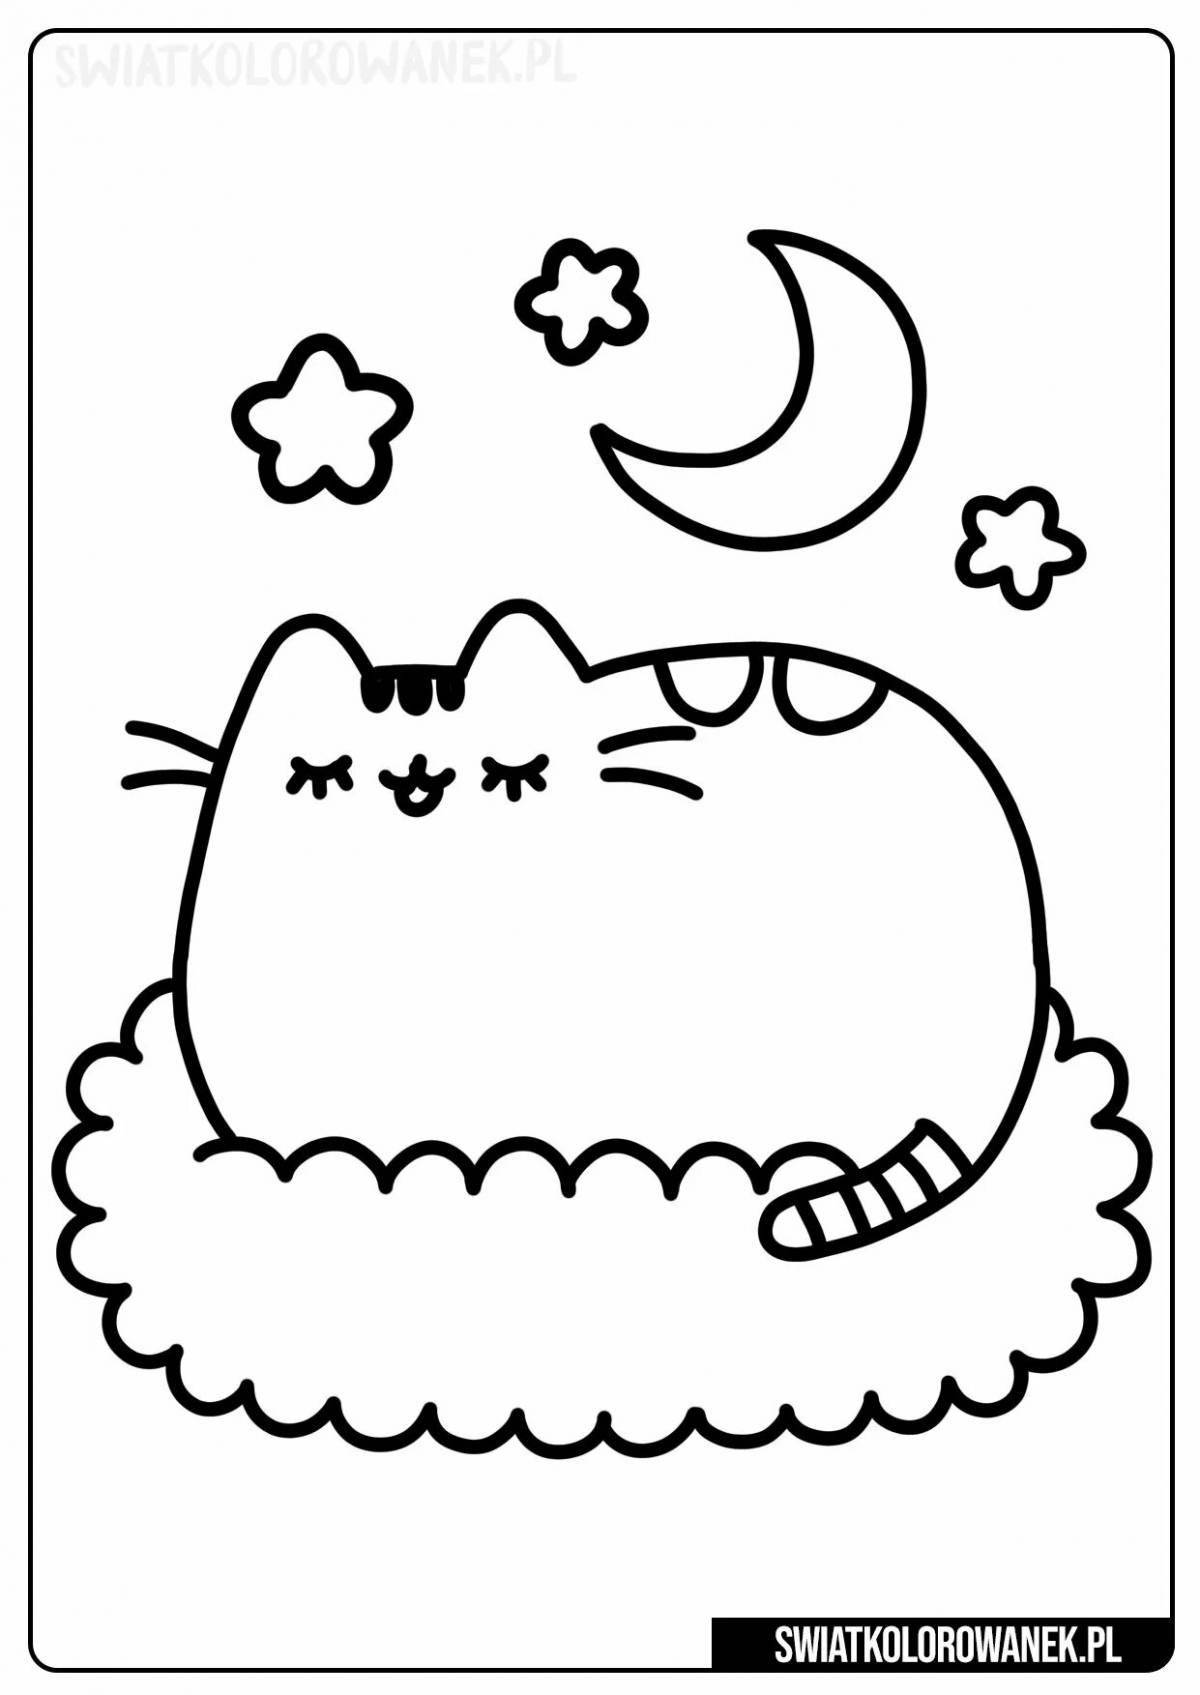 Pushin the cat coloring page for kids